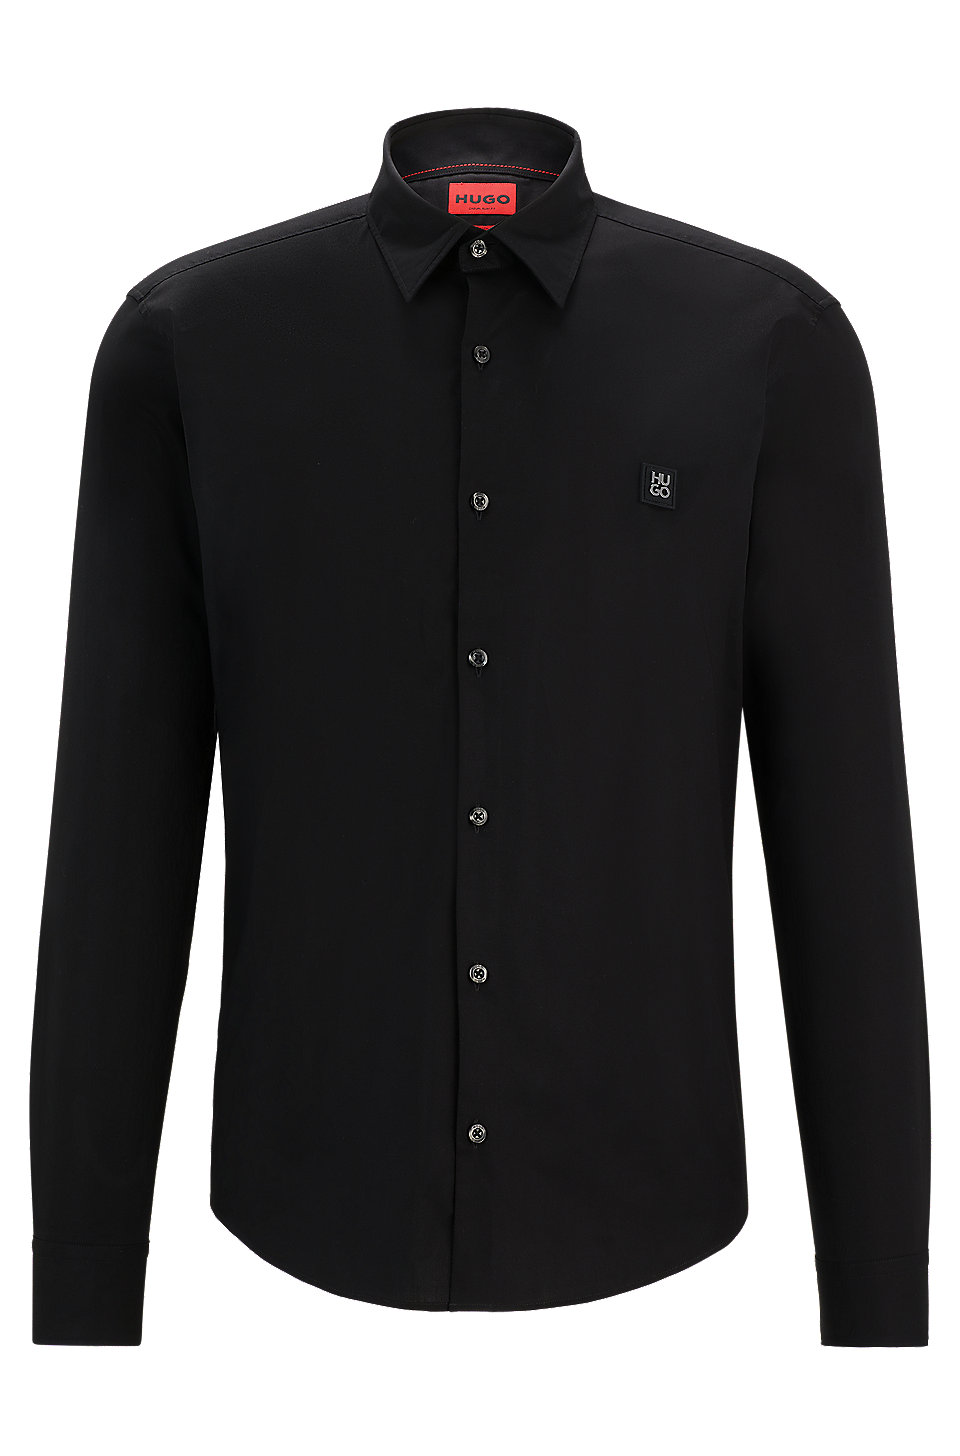 HUGO - Slim-fit shirt in stretch cotton with stacked logo